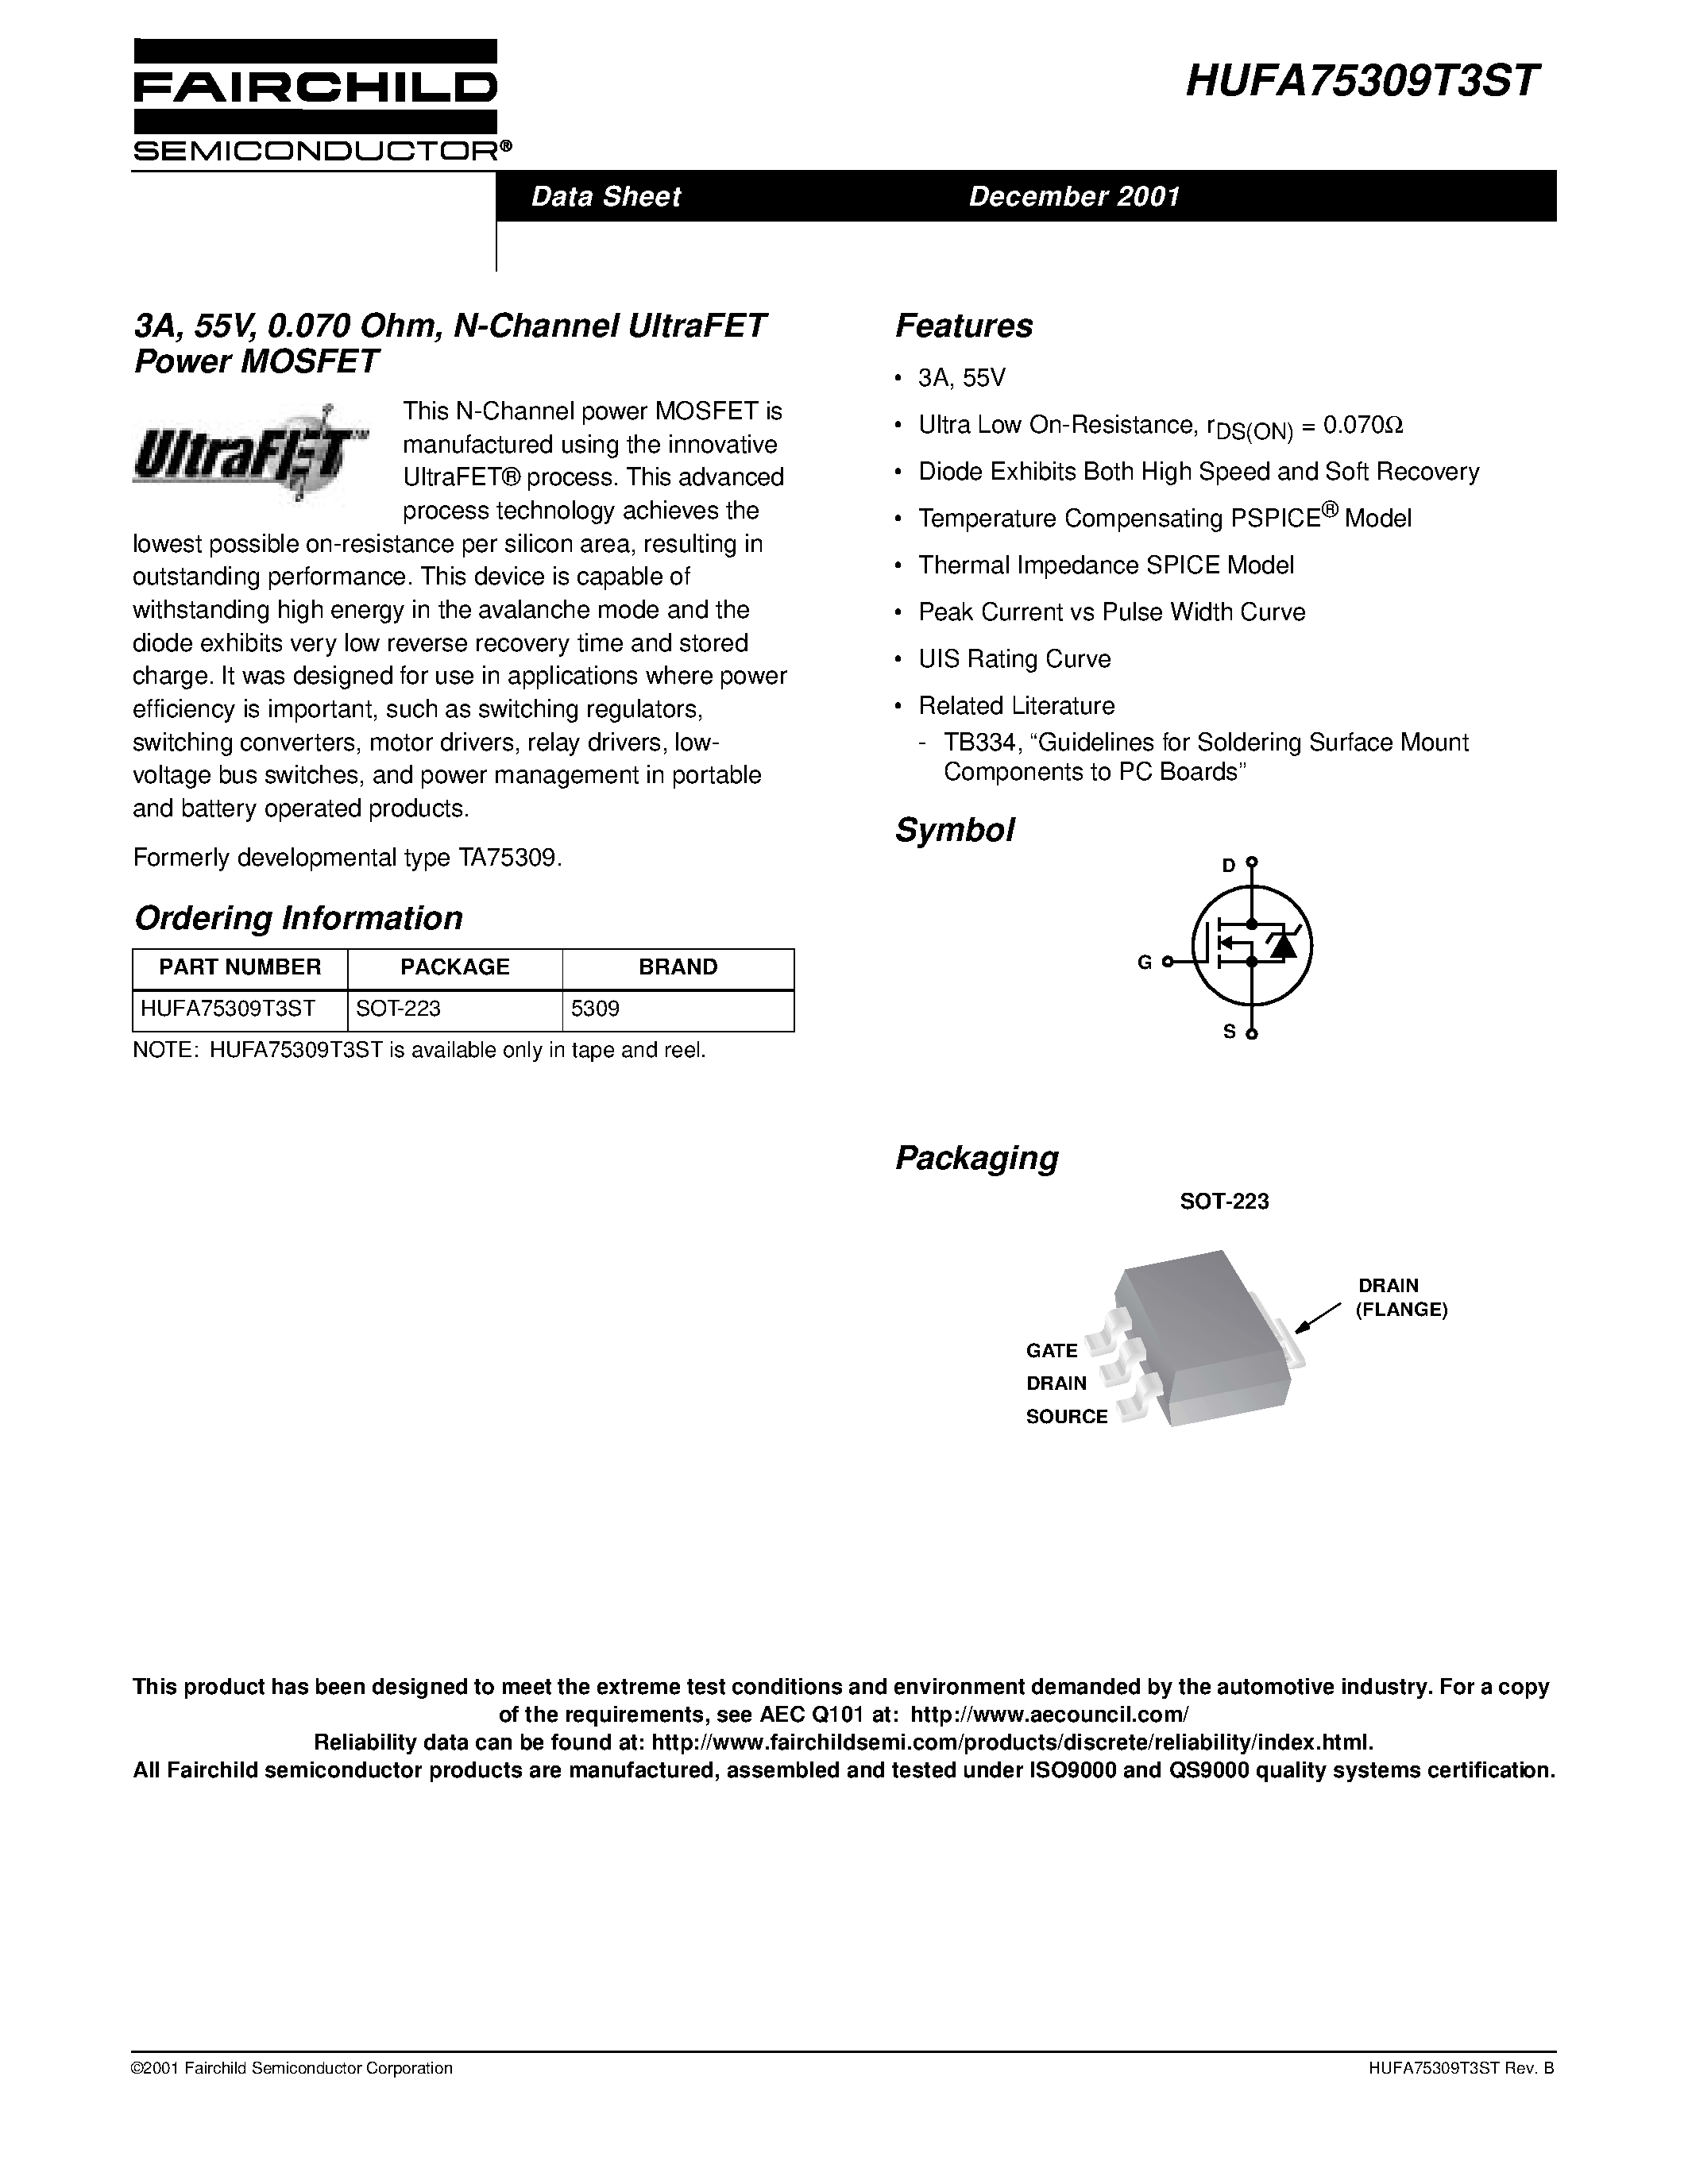 Datasheet HUFA75309T3ST - 3A/ 55V/ 0.070 Ohm/ N-Channel UltraFET Power MOSFET page 1